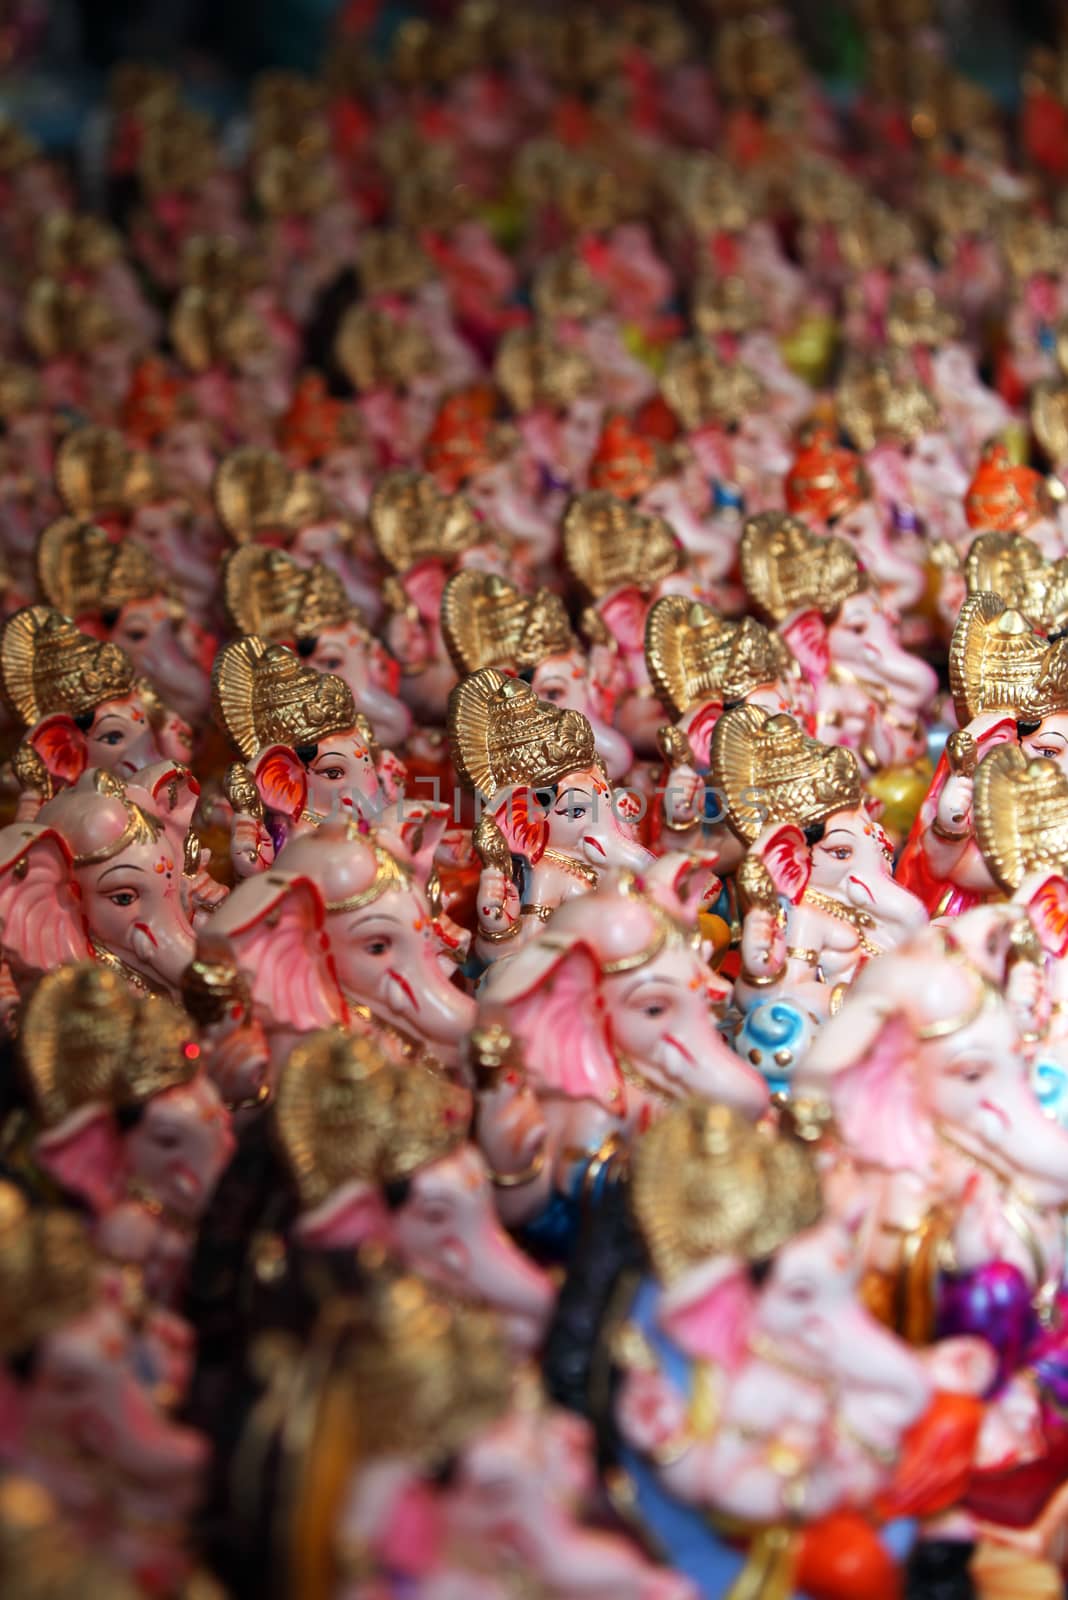 Hundreds of Ganesha idols for sale in a shop in India, on occasion of Ganesh festival